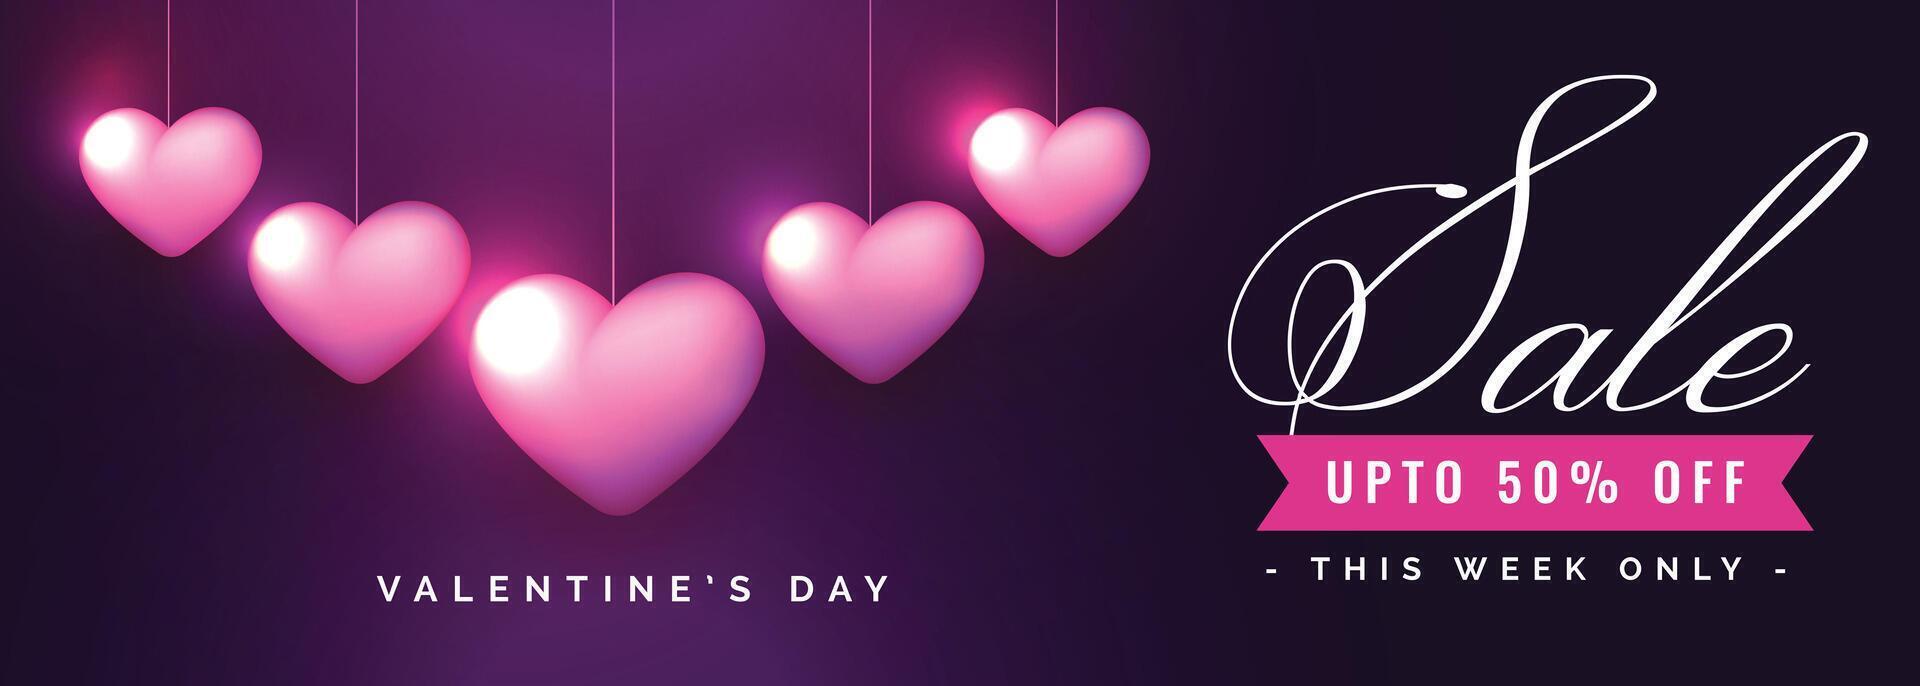 valentines day sale banner with romantic hearts vector